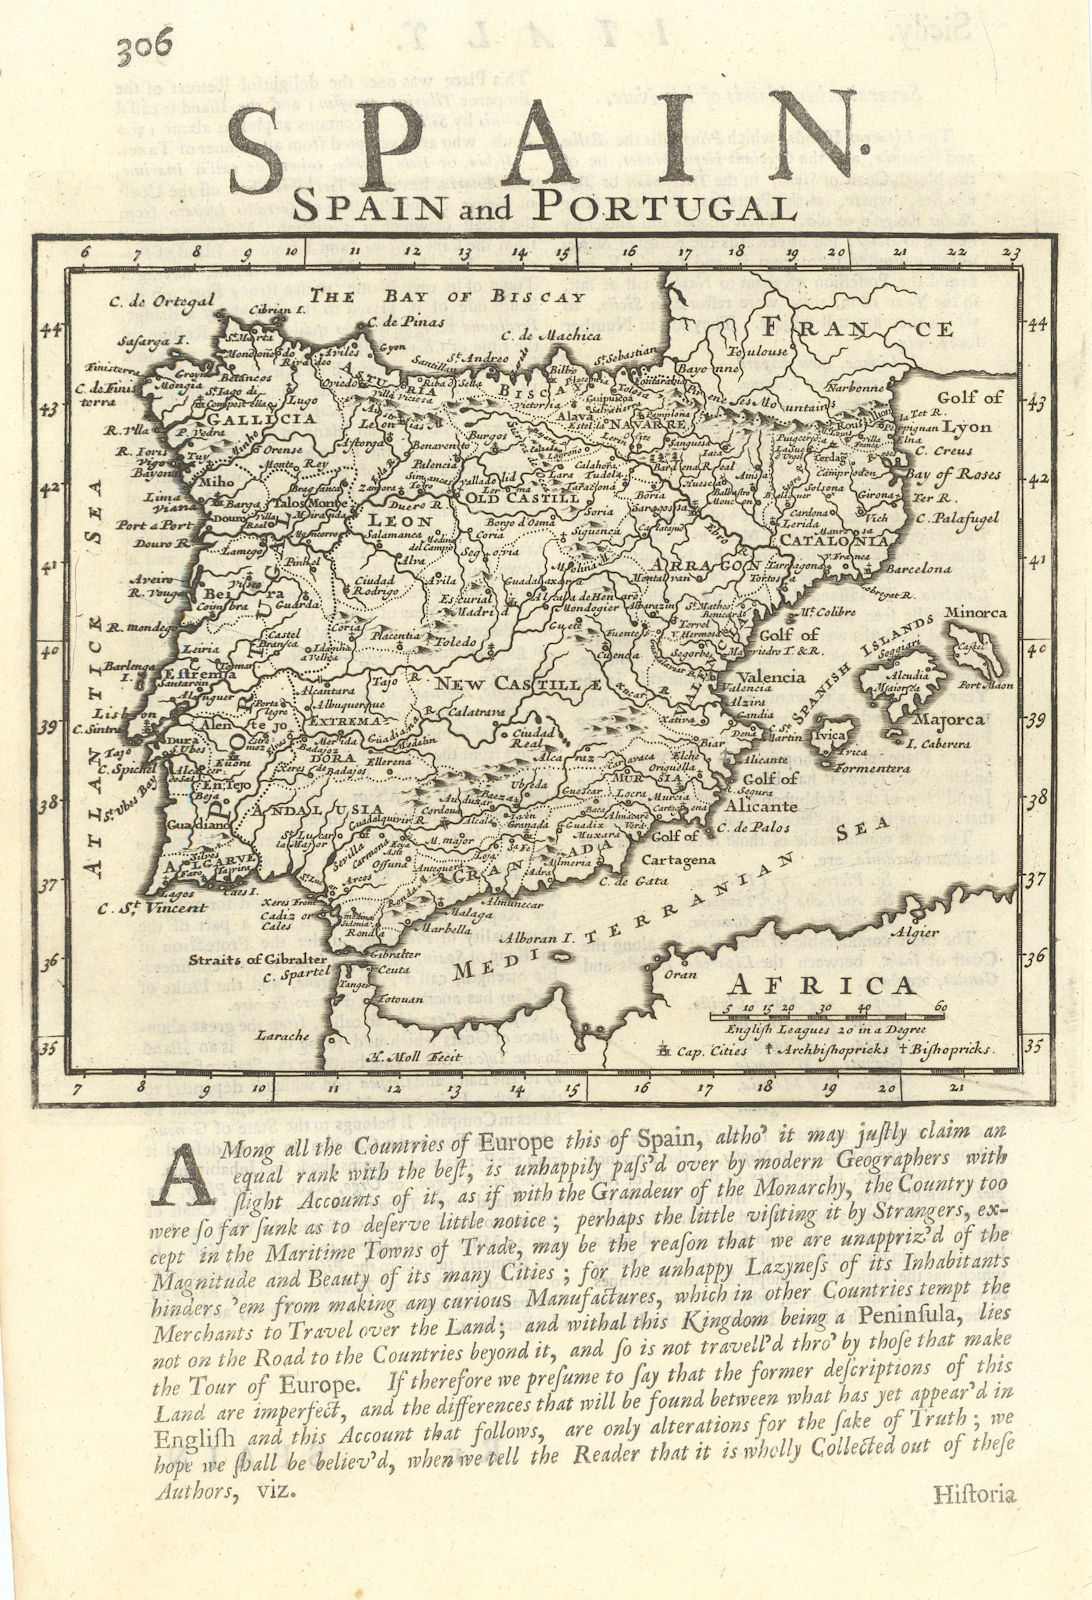 Associate Product Spain and Portugal by Herman Moll. Iberia 1709 old antique map plan chart